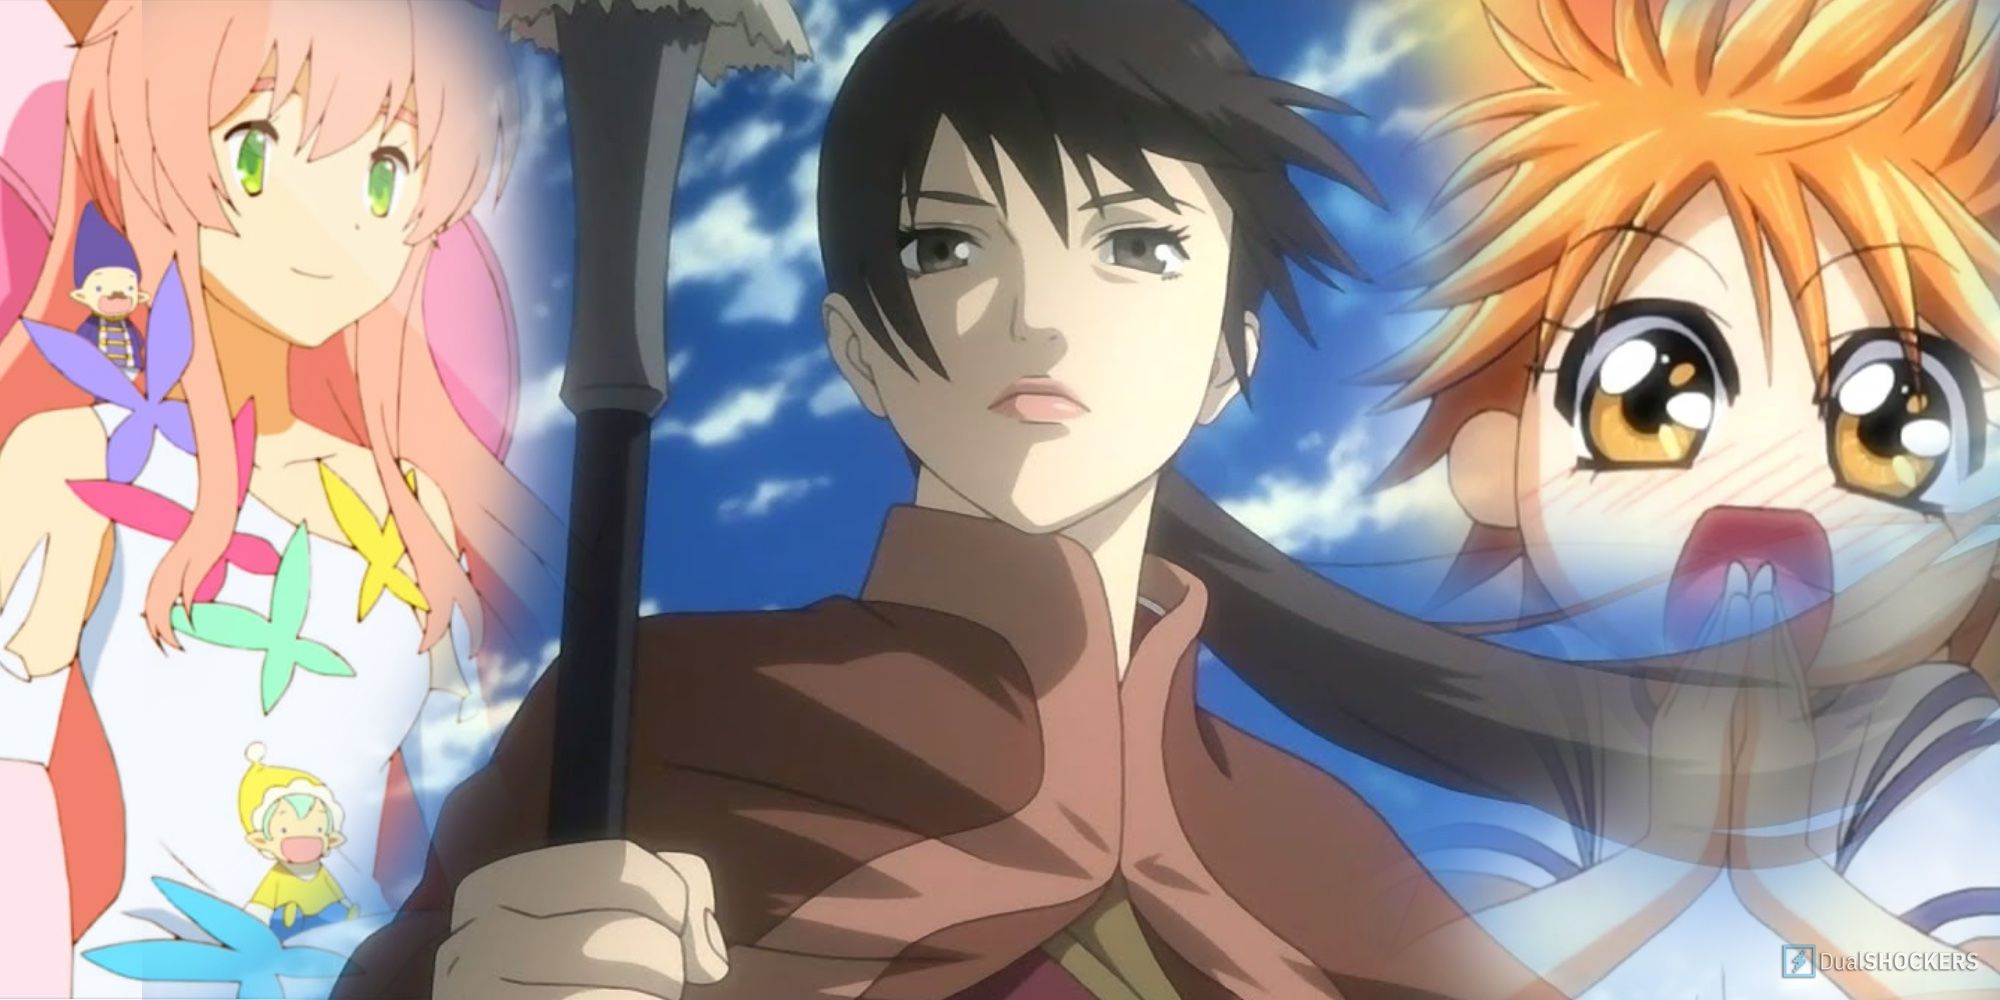 15 Underrated Classic Anime Series That Deserve Live-Action Adaptations